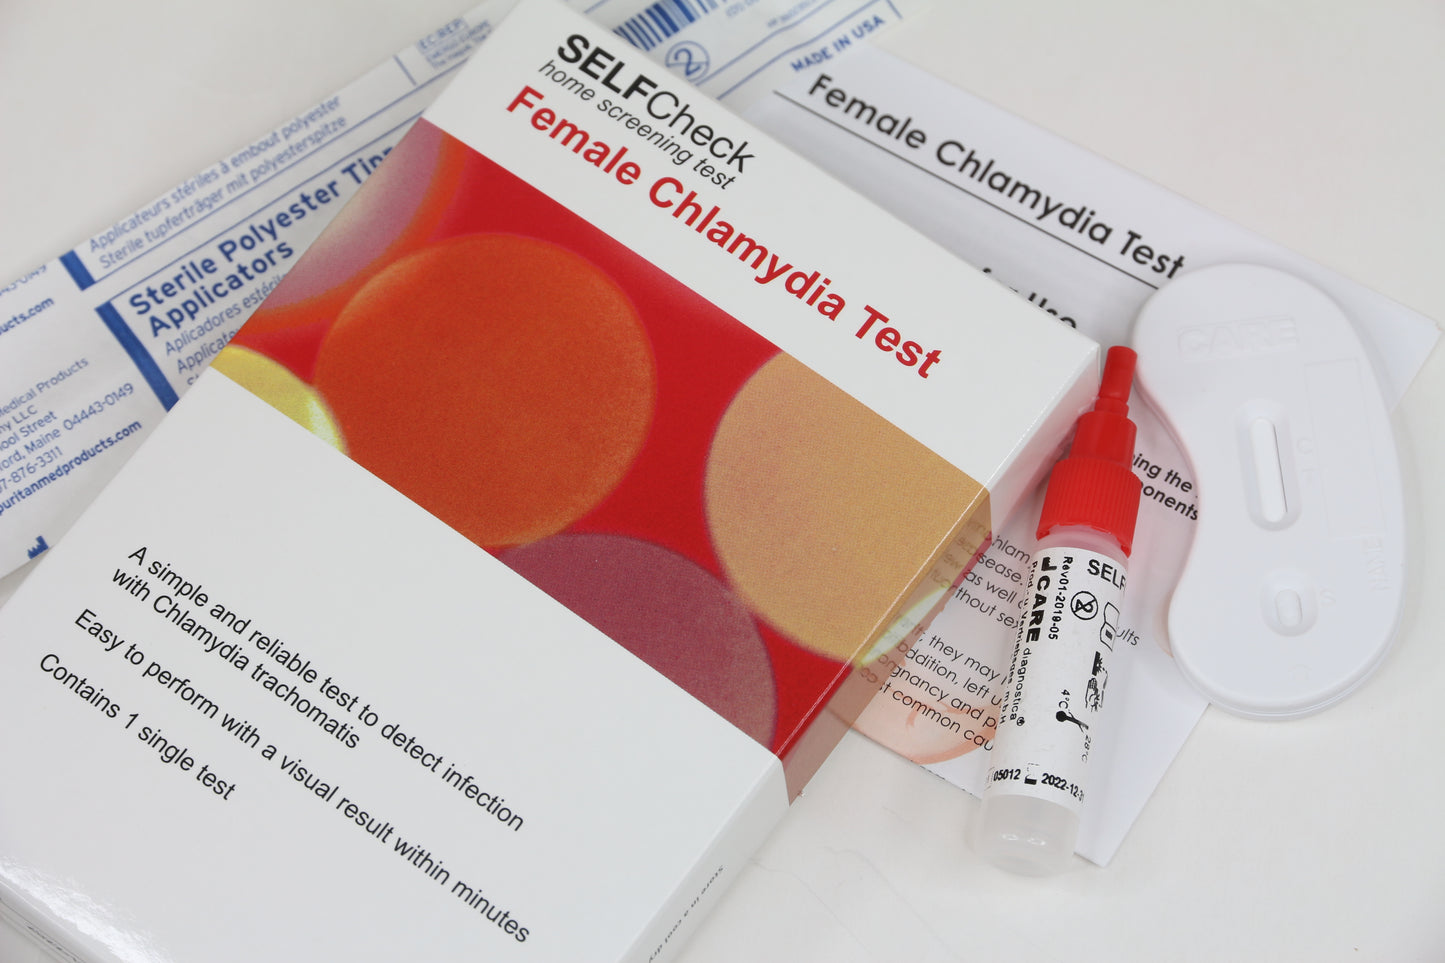 SELFCheck female chlamydia test kit box and components